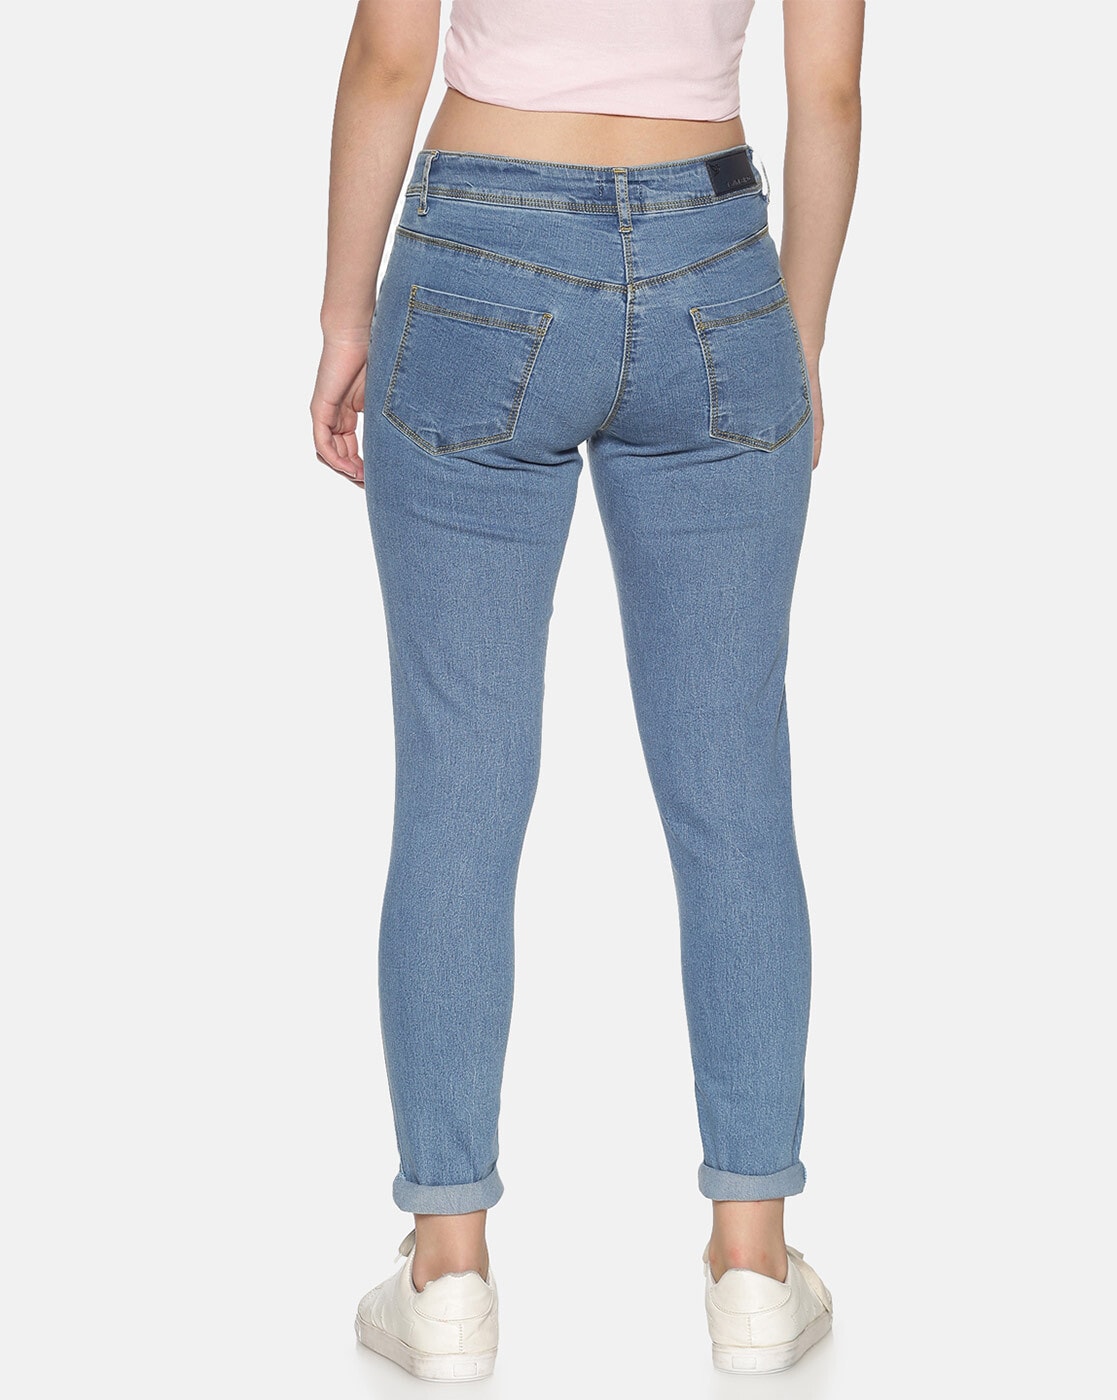 Twin Birds Slim Women Light Blue Jeans - Buy Twin Birds Slim Women Light  Blue Jeans Online at Best Prices in India